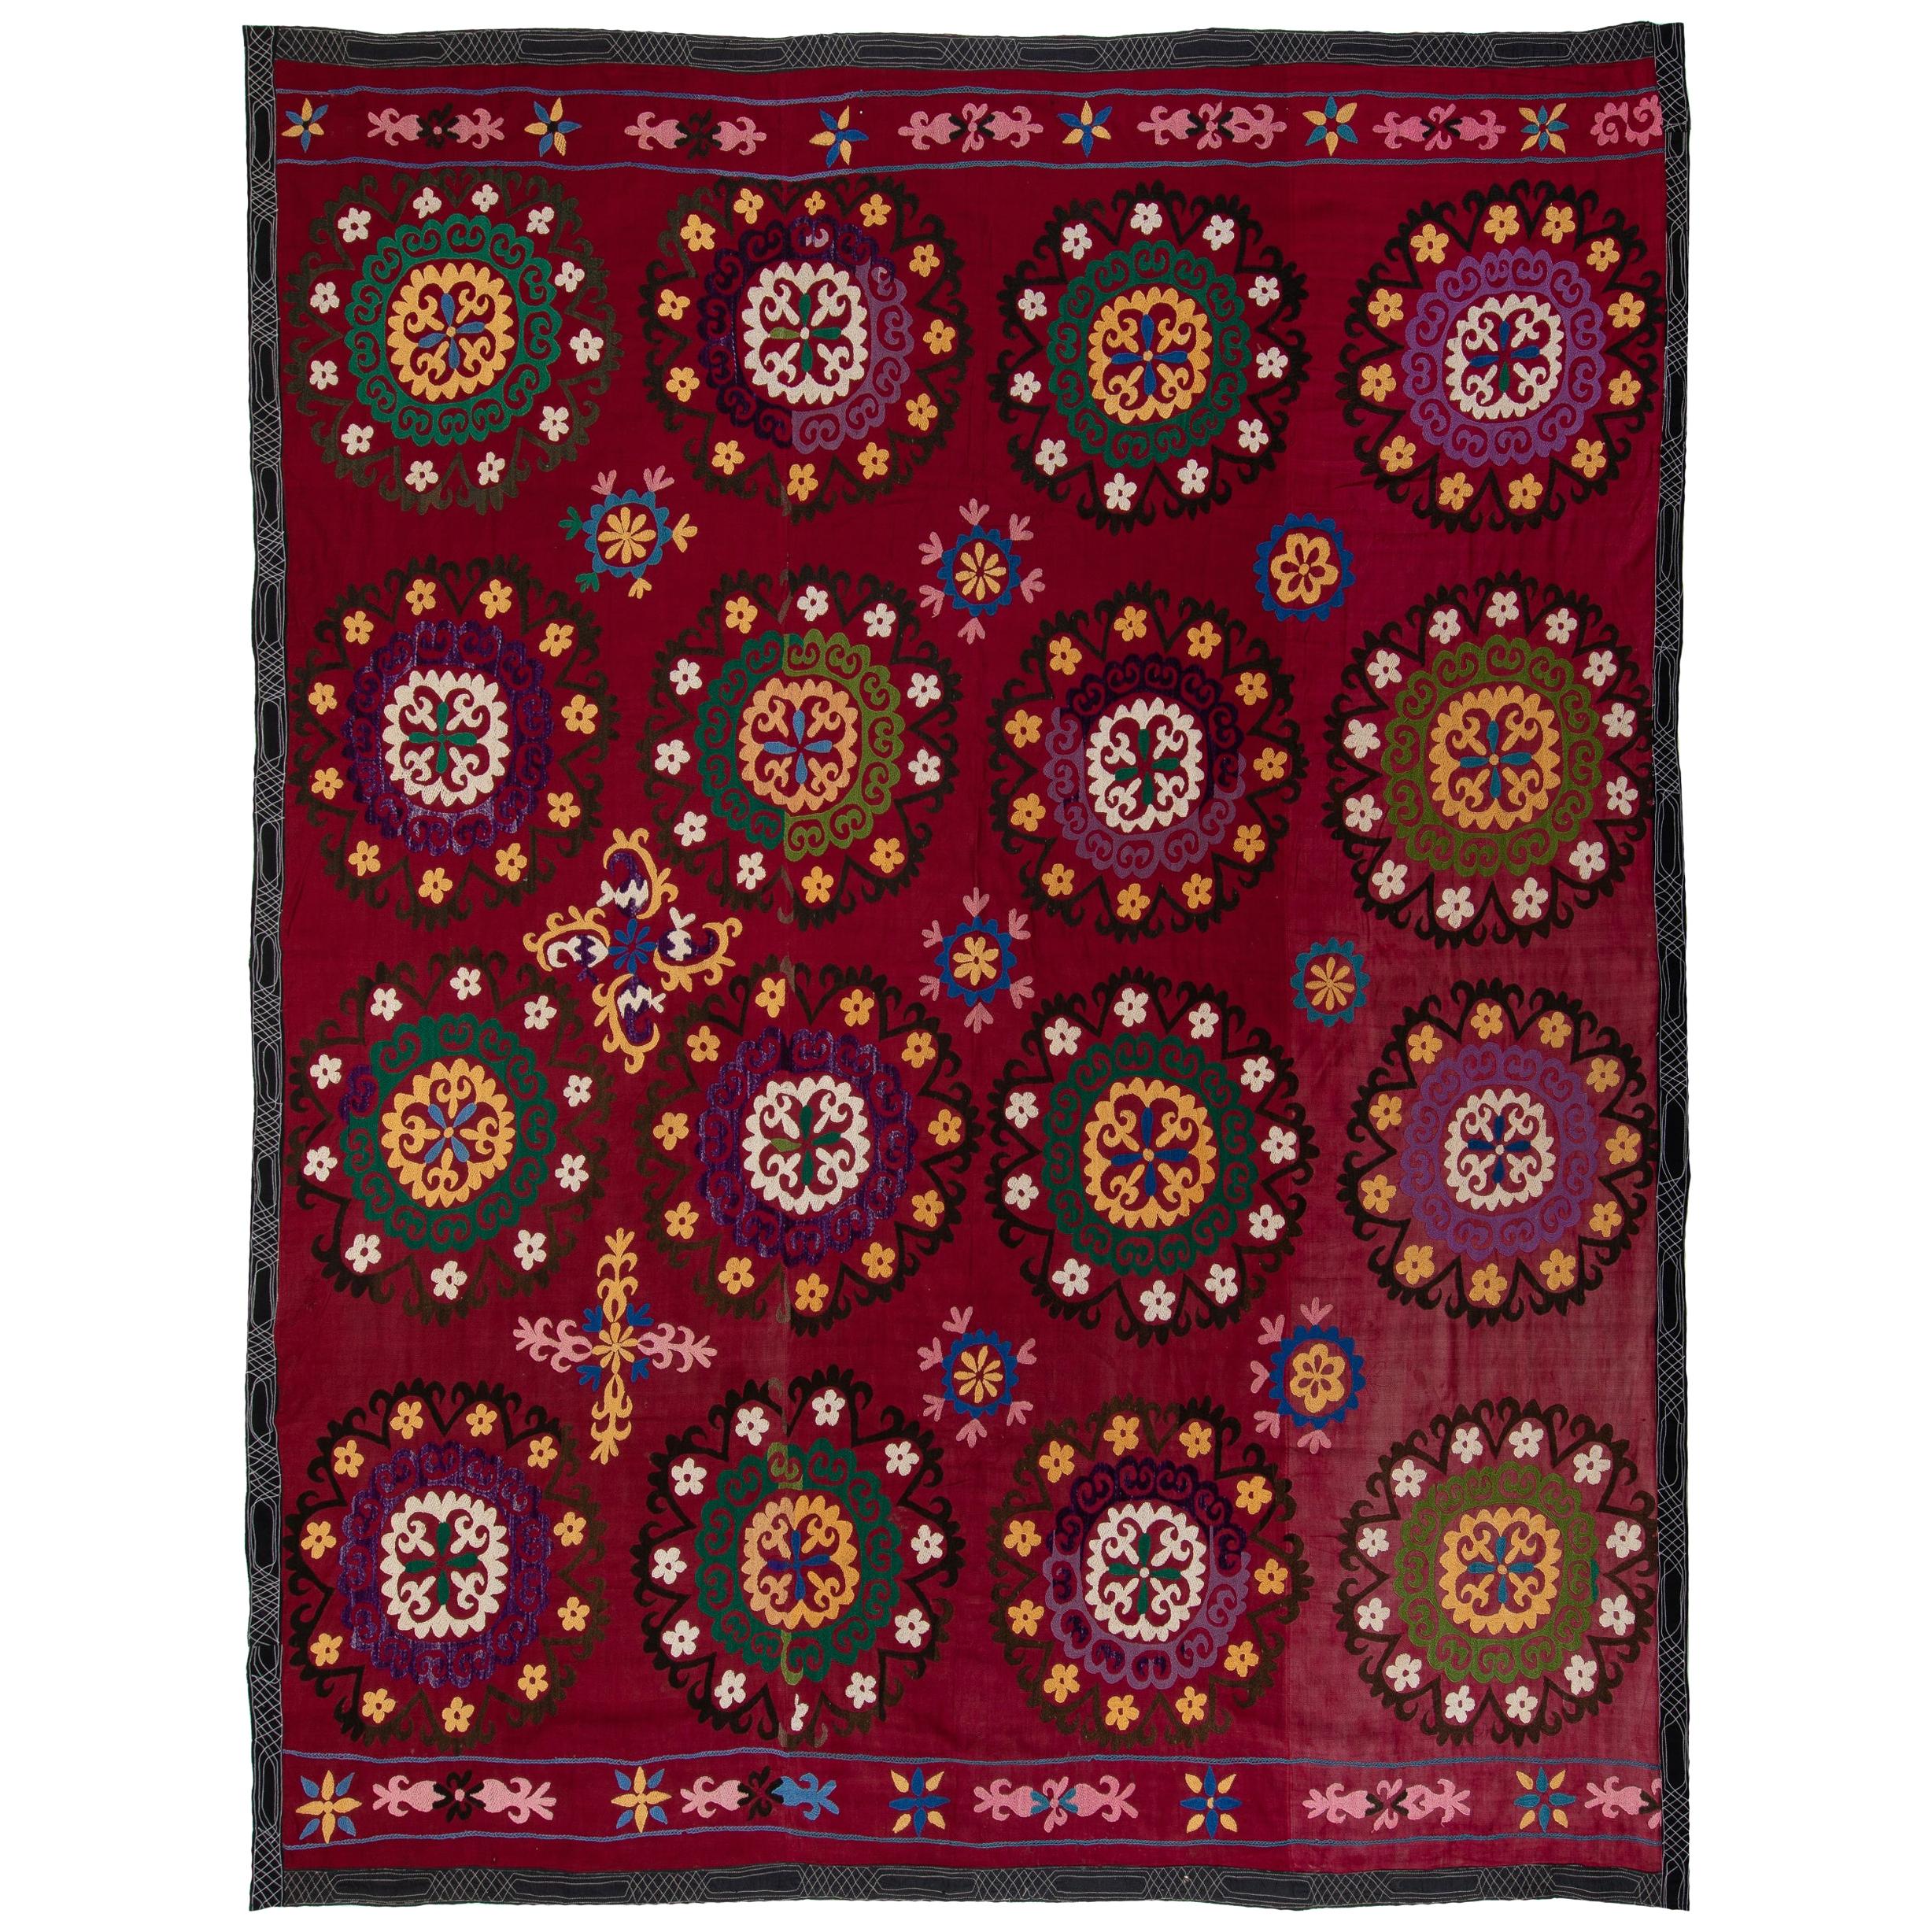 6.8x7.8 Ft Central Asian Suzani Textile, Embroidered Cotton & Silk Wall Hanging